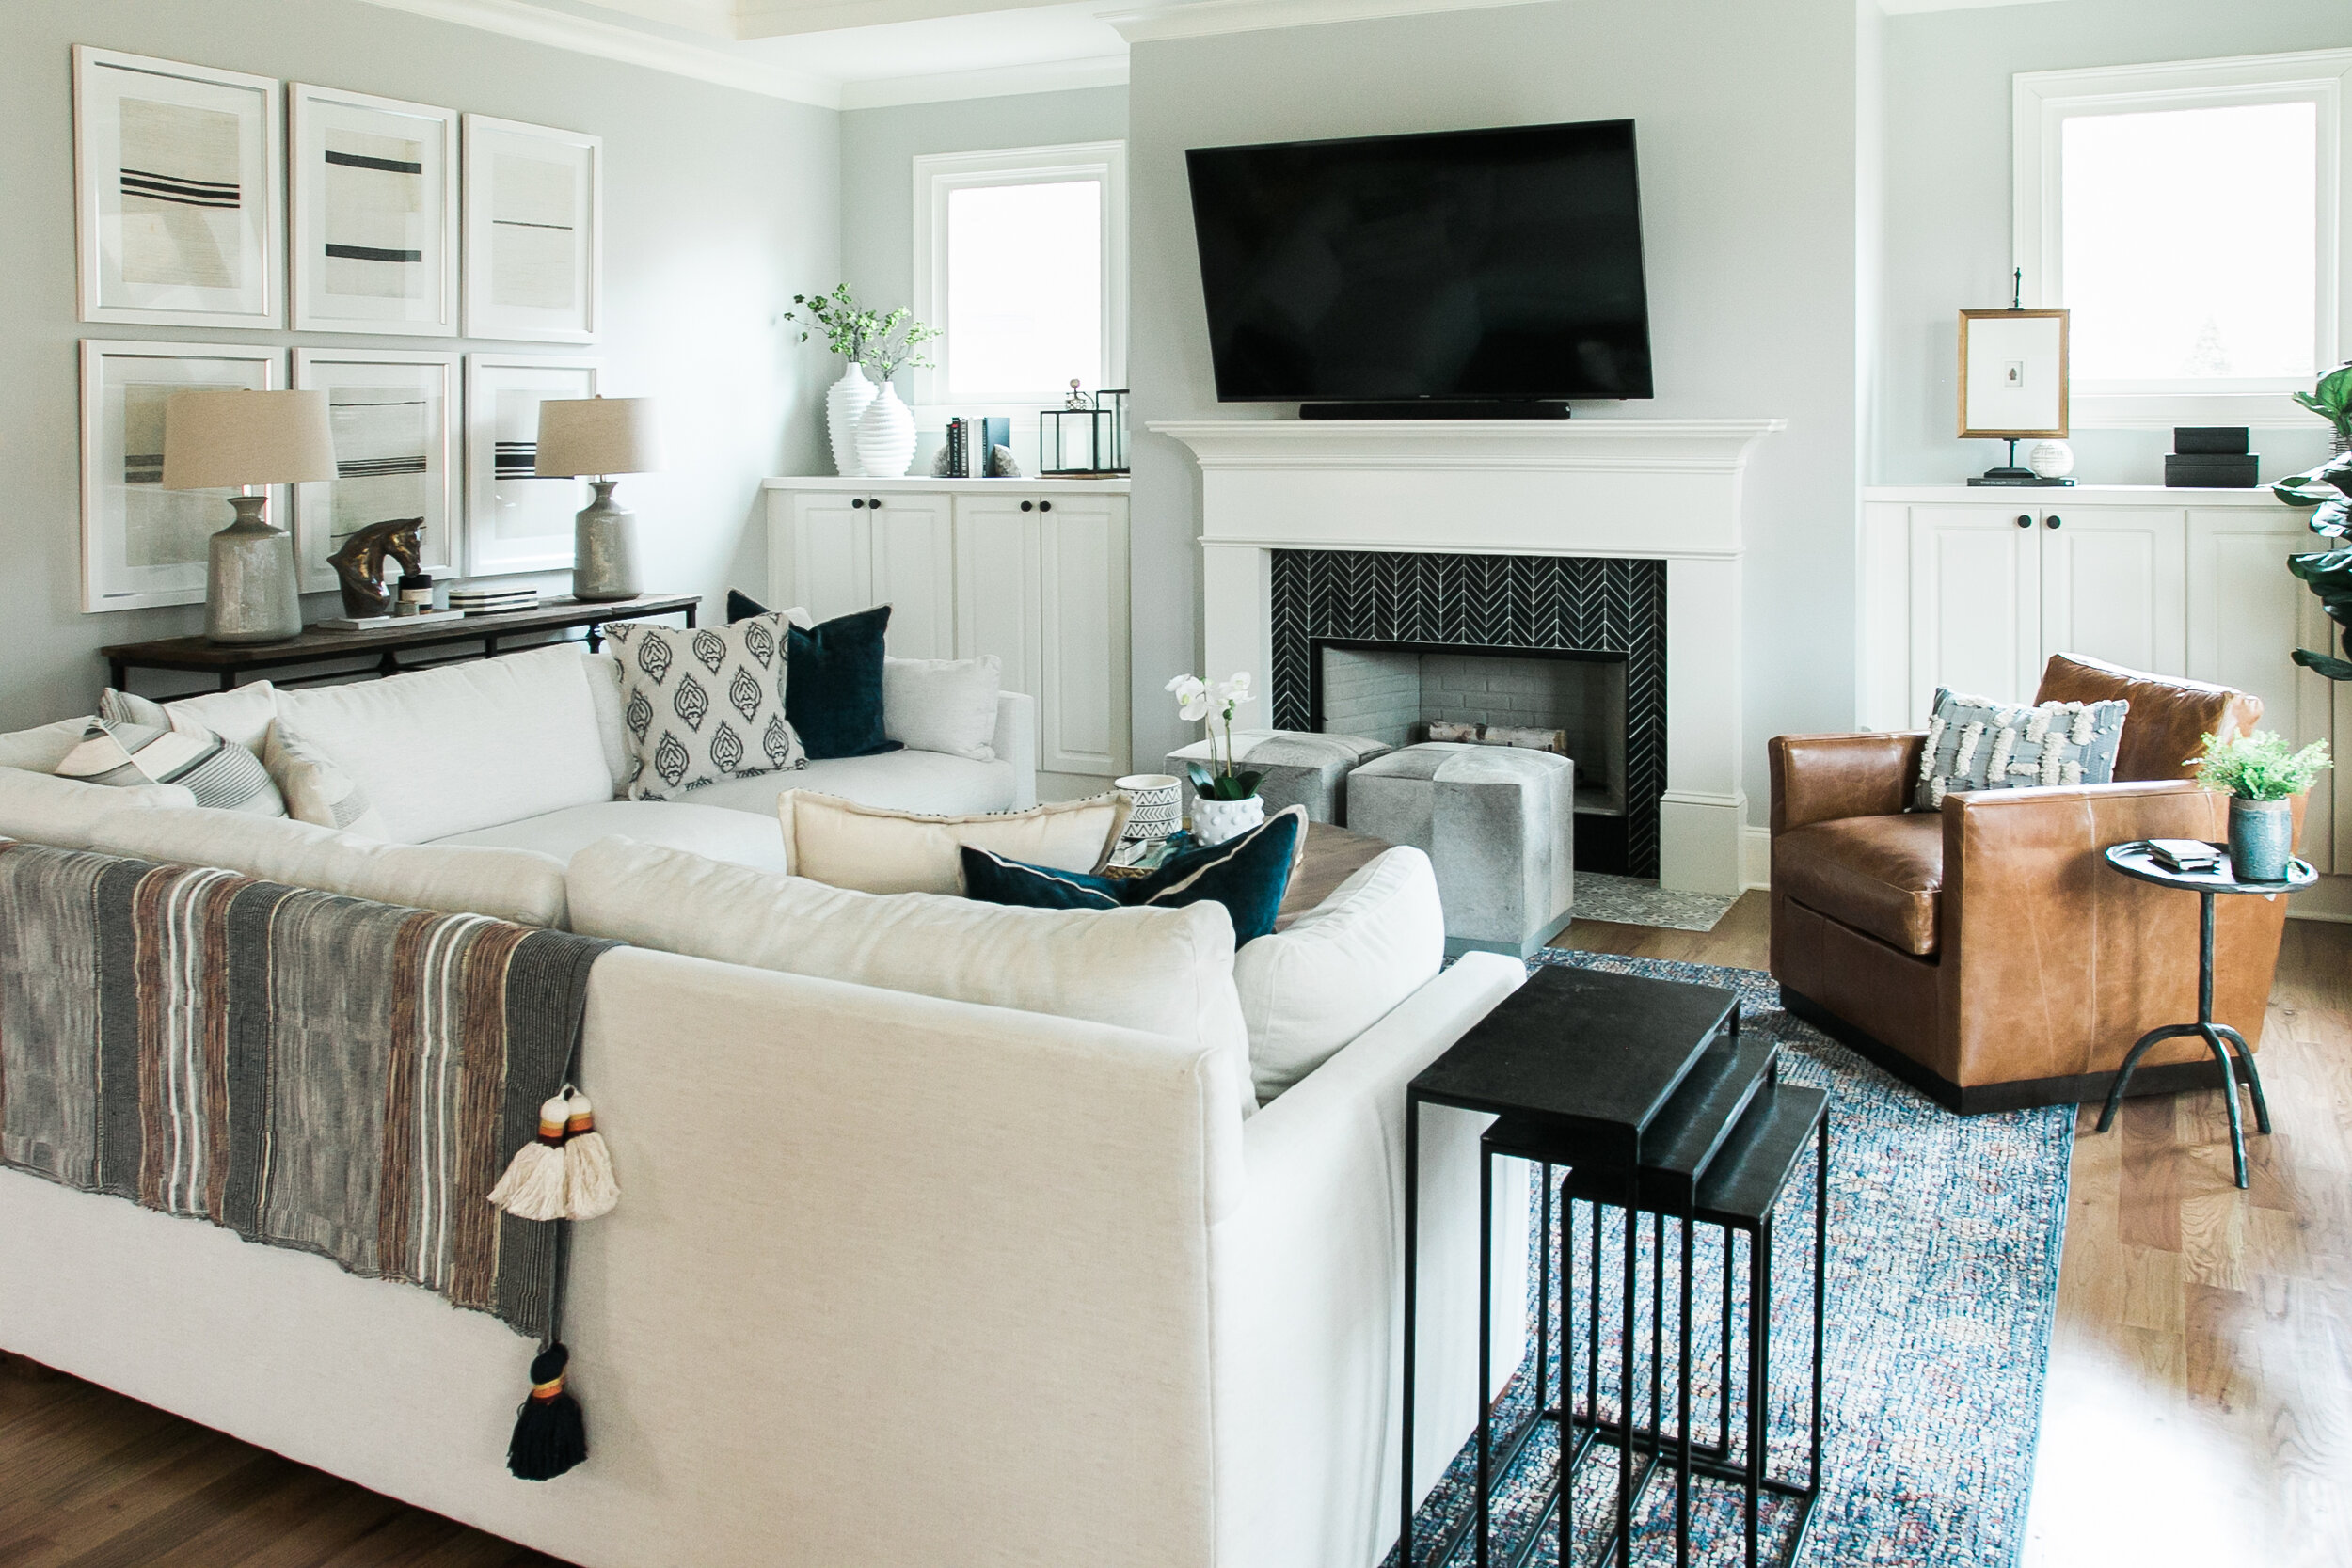 A cozy minimalist living room features white built-in cabinets on either side of a fireplace with white crown molding and a black herringbone tiled interior with a flatscreen on the mantle above it. A white couch and brown leather chair sit on a blue multicolored rug, with white trimmed windows above the cabinets on either side of the fireplace with natural light coming through. The walls are a light sea foam green with plants, lamps, and textured blankets adding warmth and dimension, with a set of black nesting tables sitting beside the couch in the foreground.